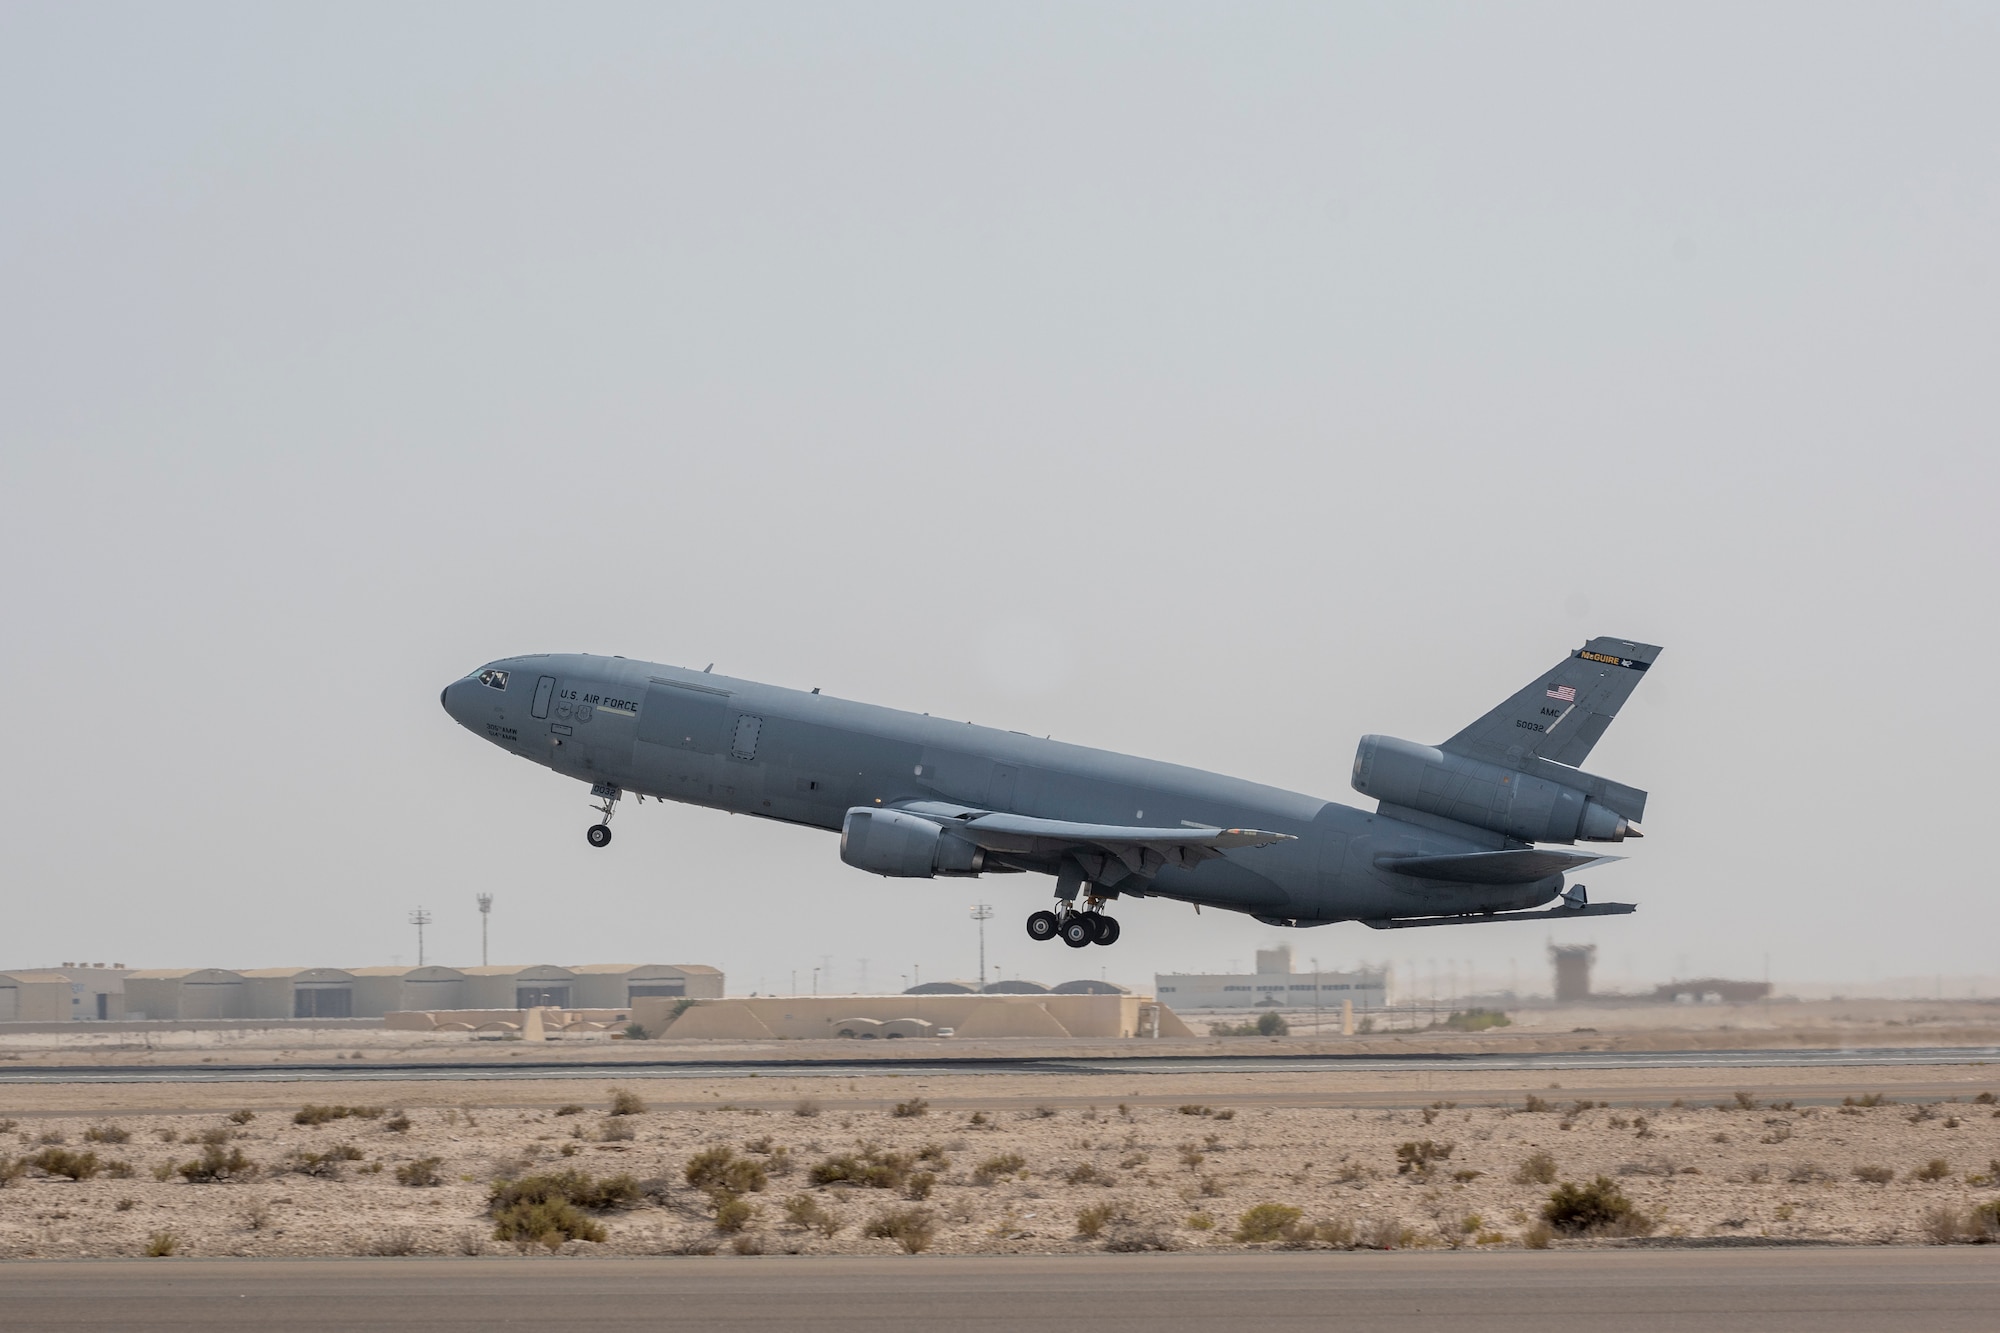 KC-10 refueling aircraft taking off